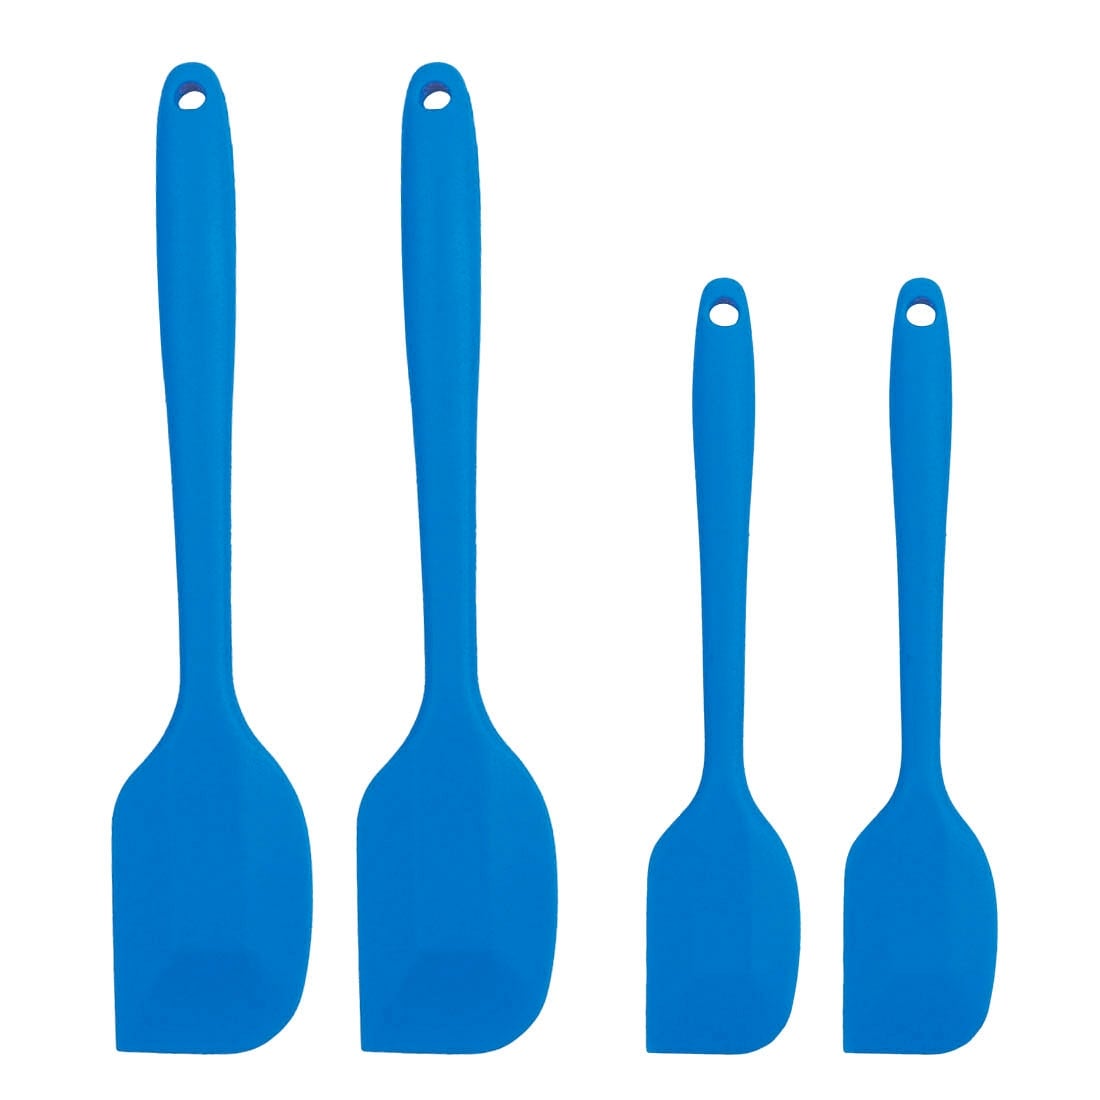 https://ak1.ostkcdn.com/images/products/is/images/direct/8195858c78fad2d169970ecafb4860ca59437684/Silicone-Spatula-Set-4-Pcs-Heat-Resistant-Non-scratch-Kitchen-Turner-Non-Stick-Spatula-for-Cooking-Mixing-Blue.jpg